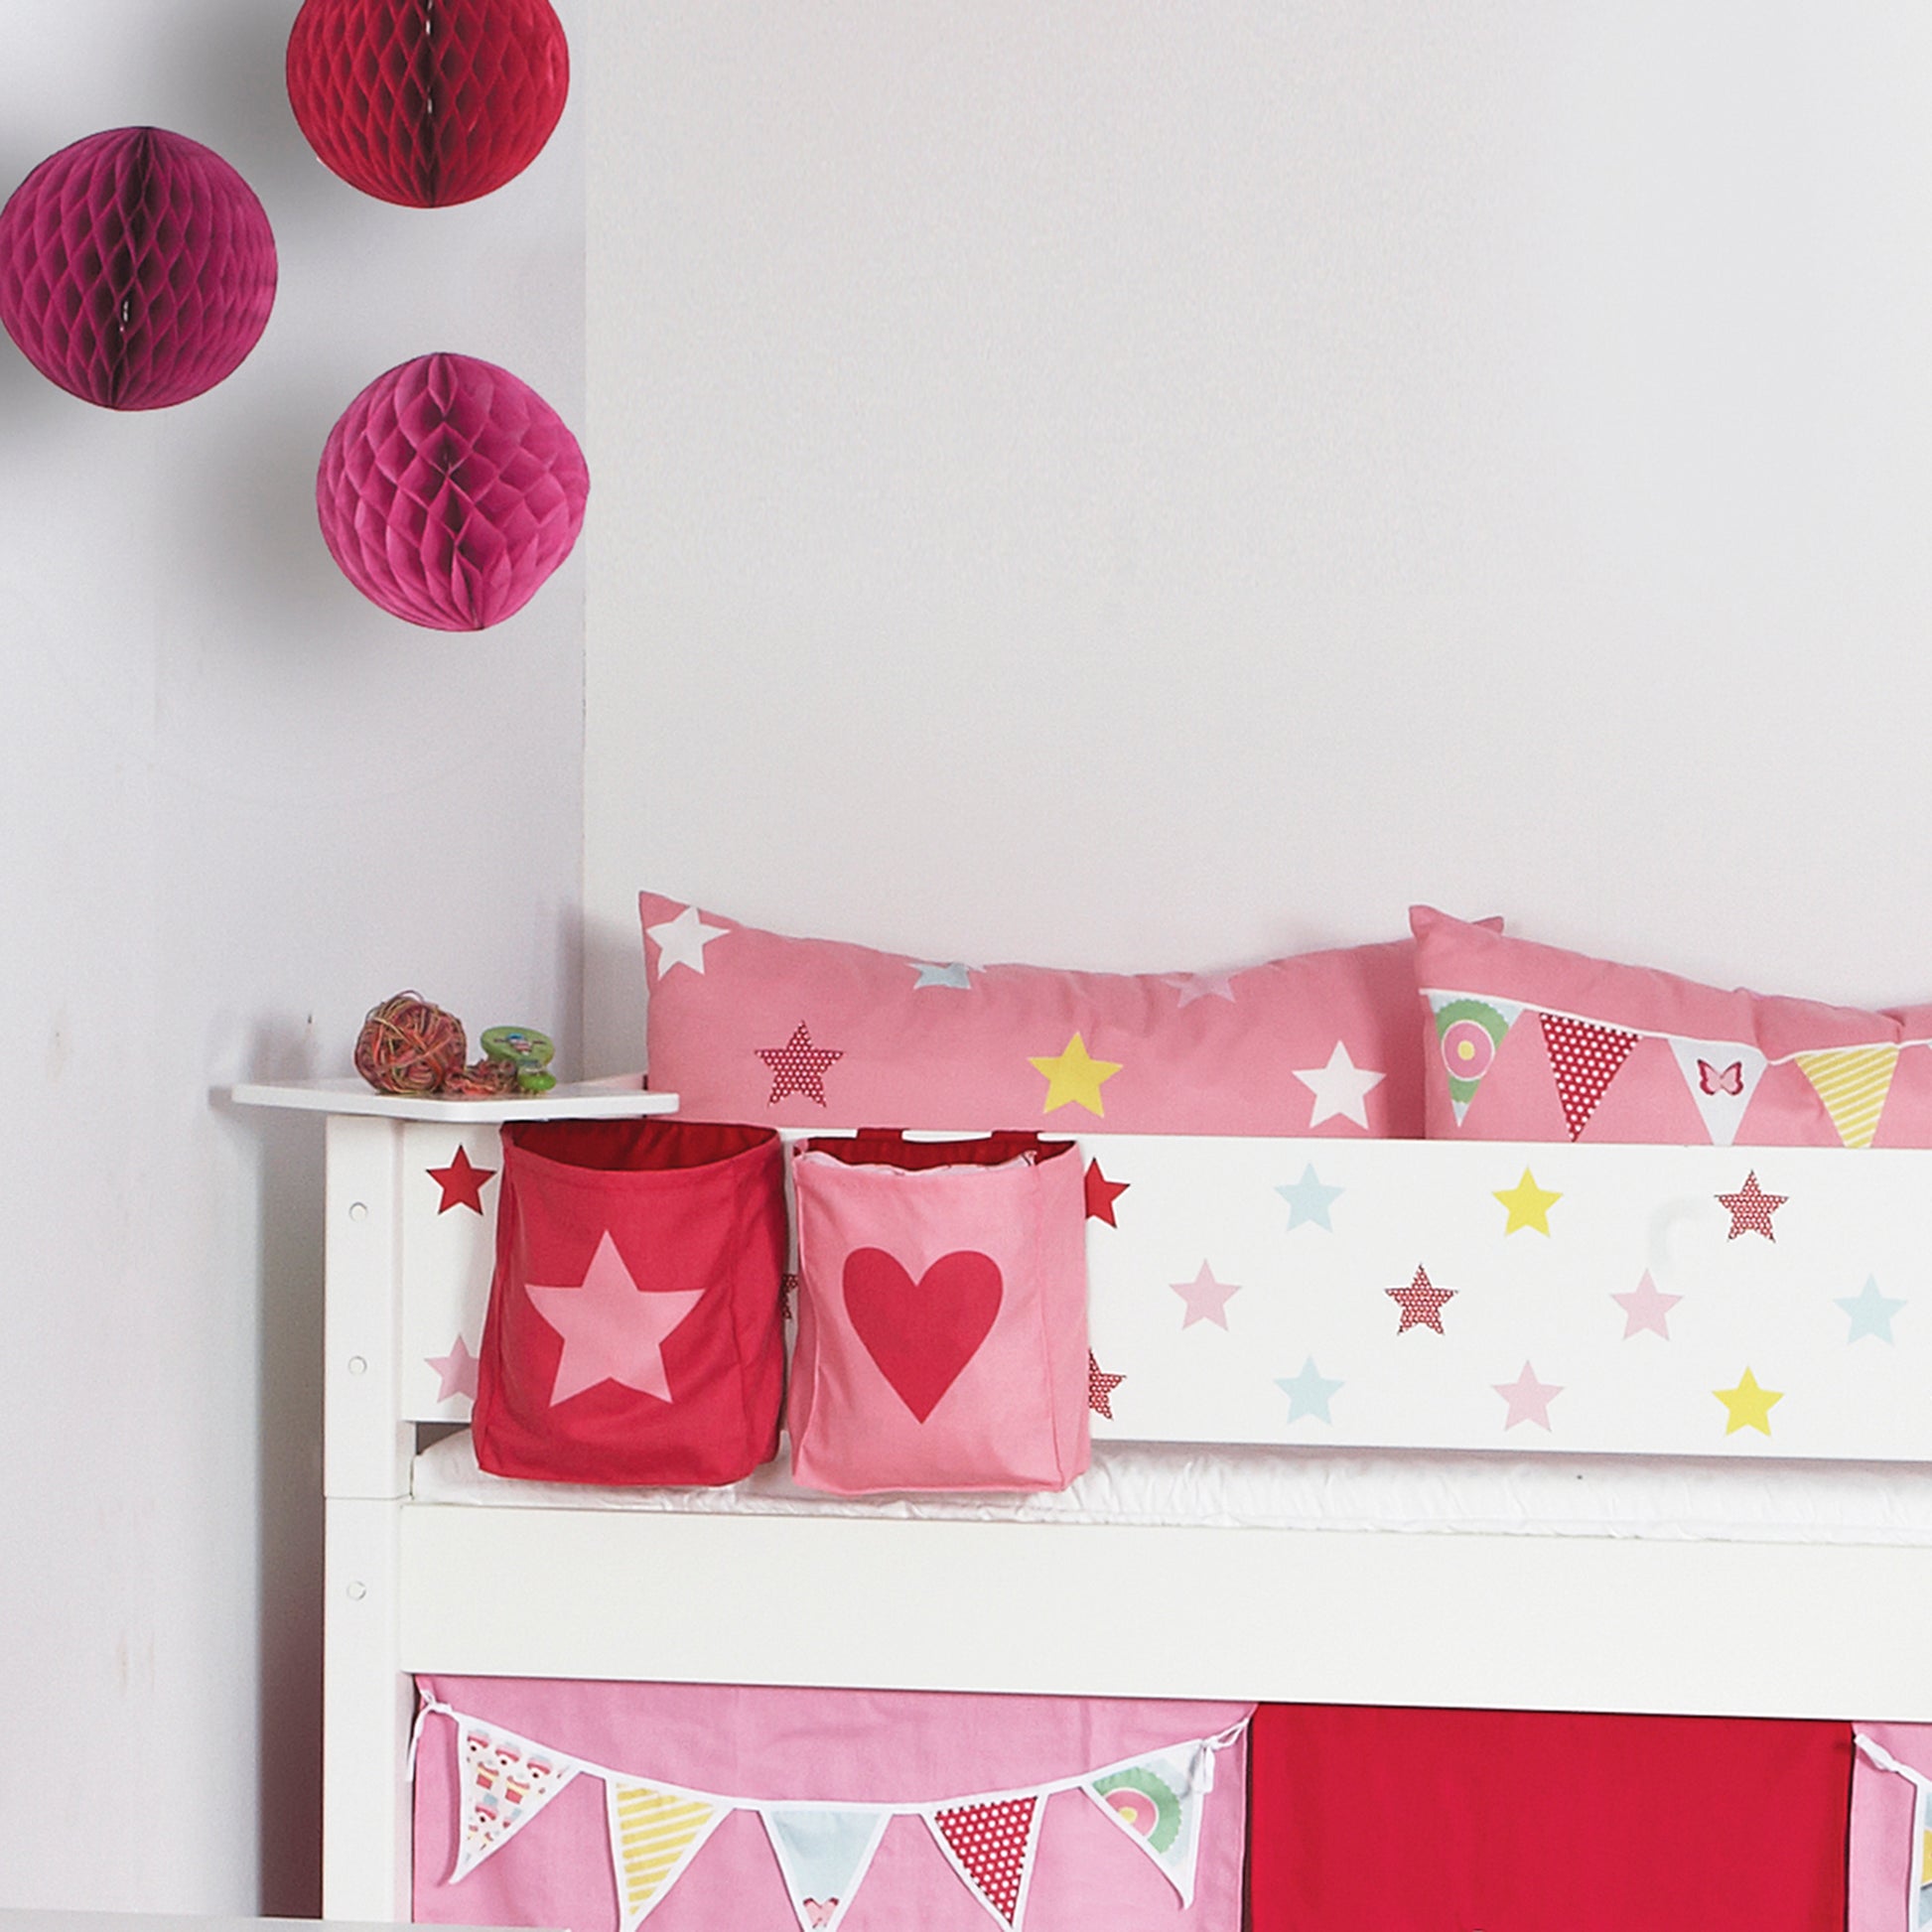 Manis-h  2 Bed Pockets in a Heart & Star Design